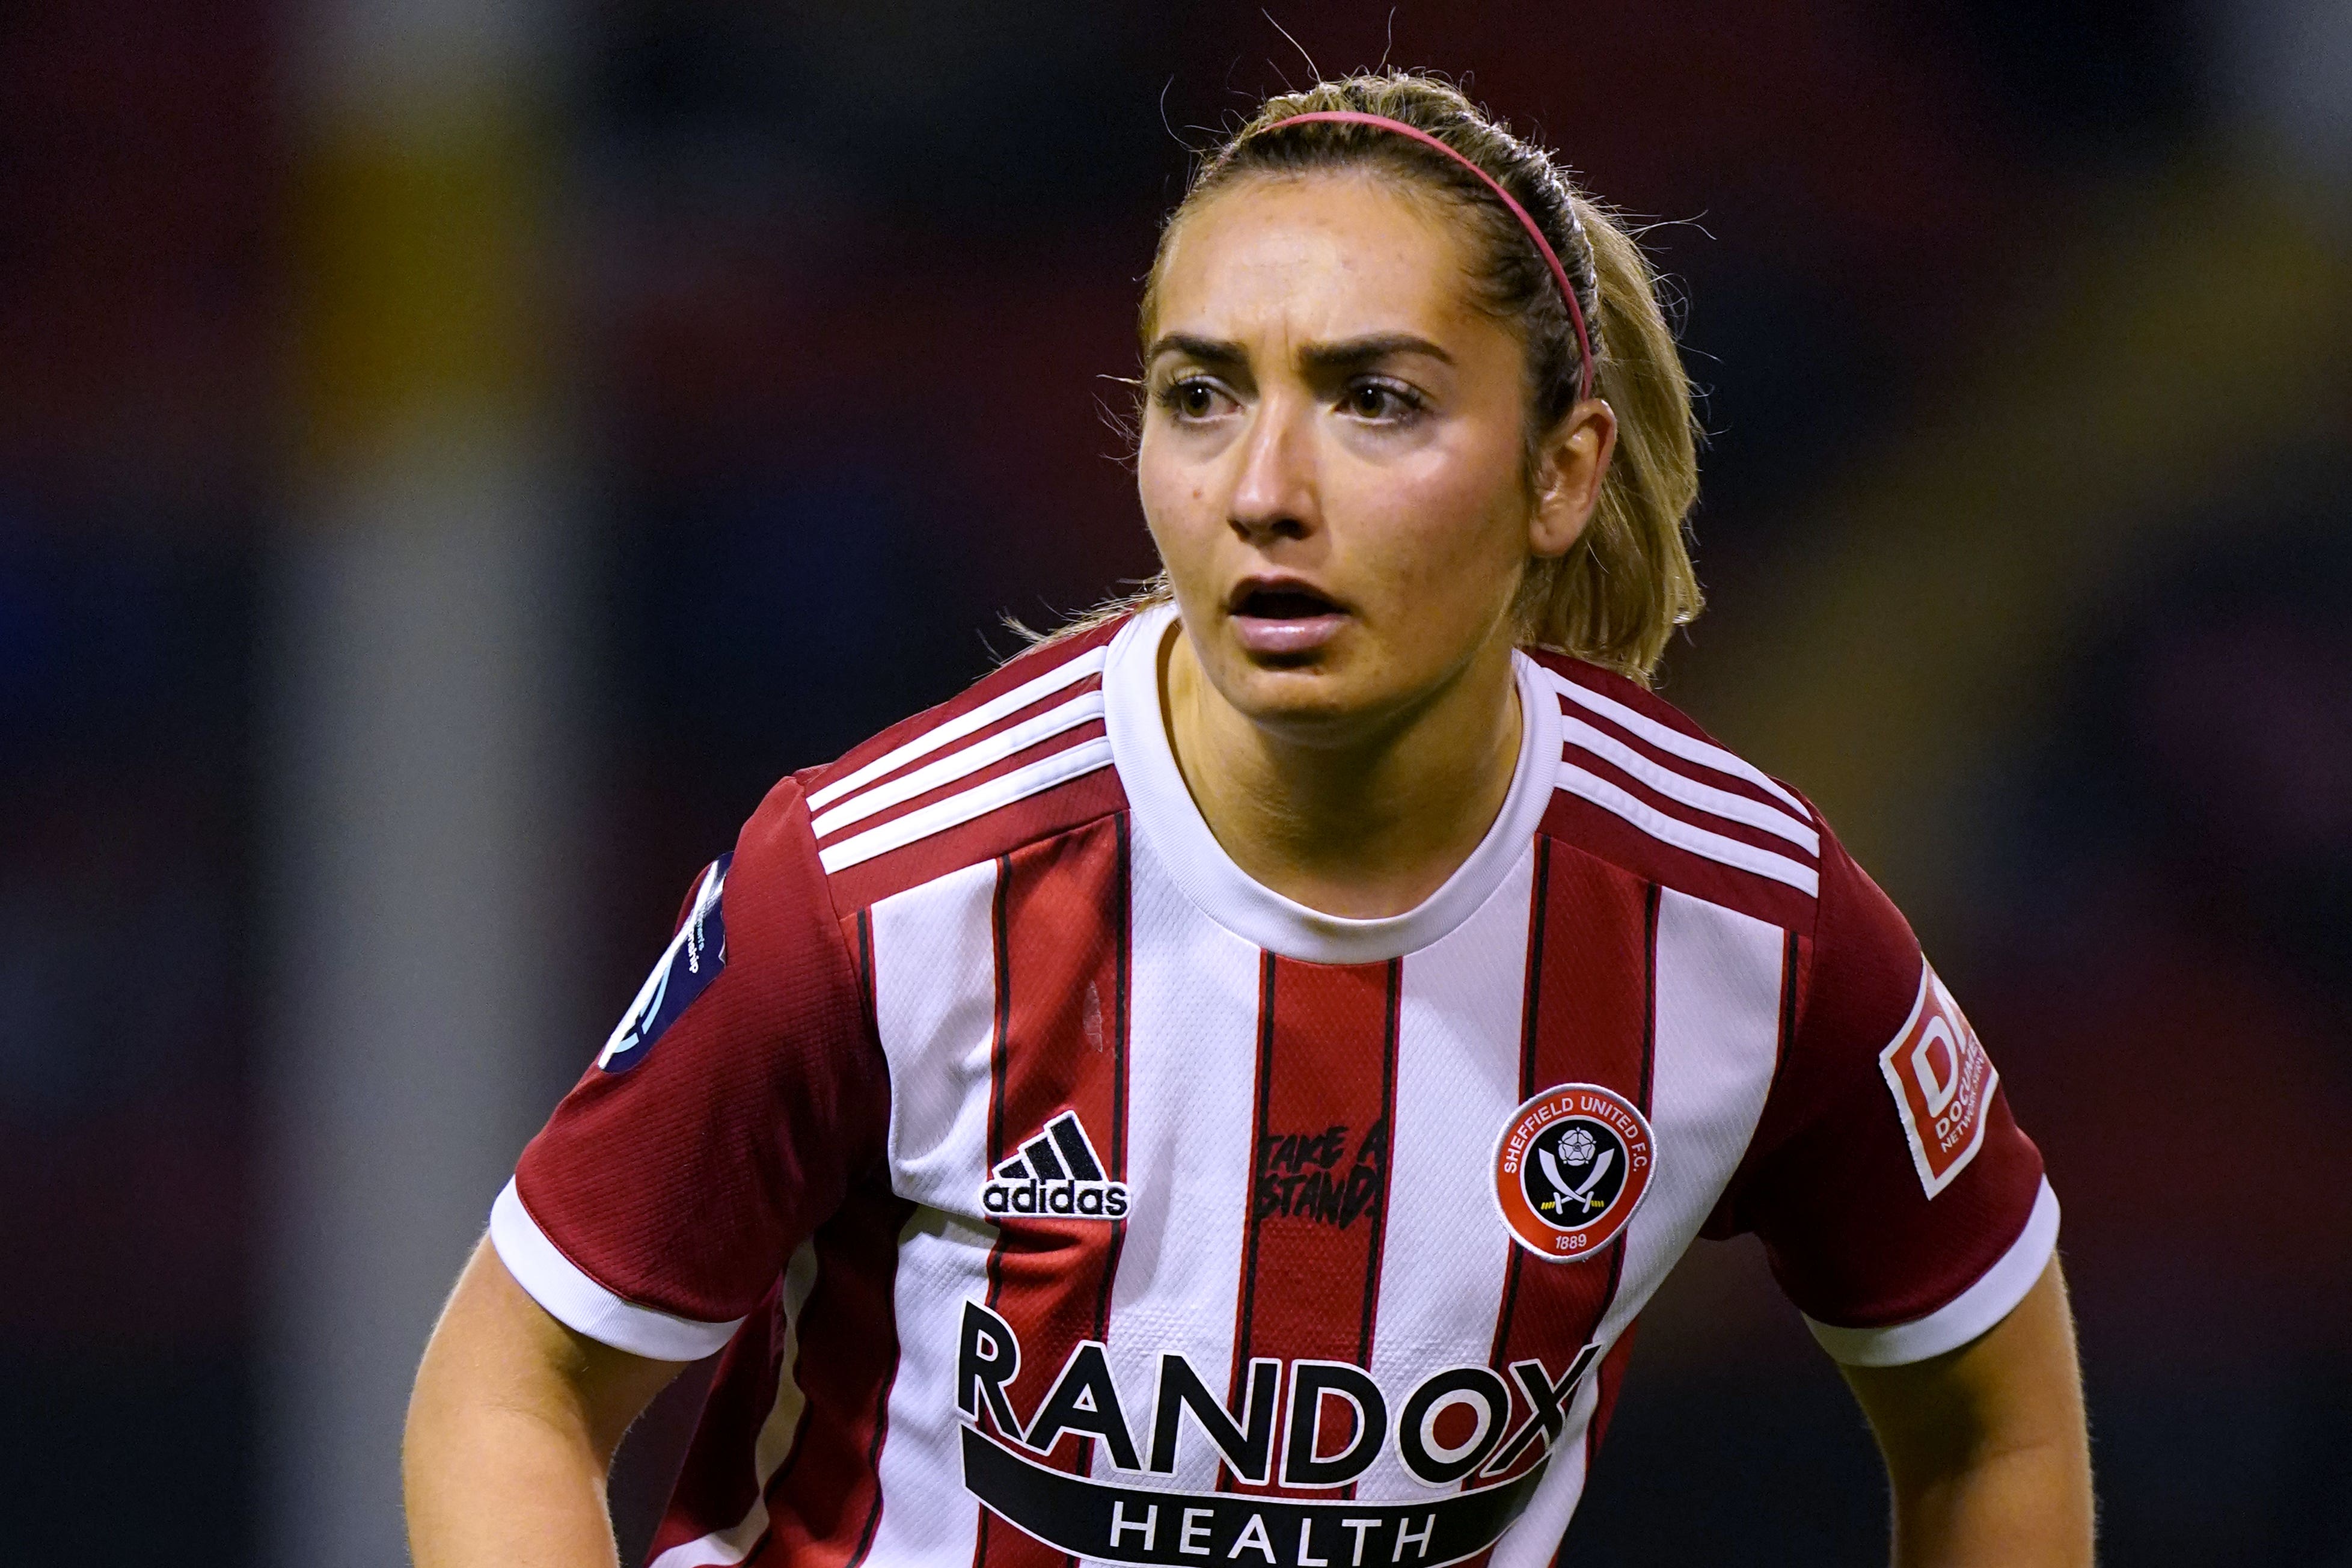 An investigation commissioned by Sheffield United following the death of Maddy Cusack found no evidence of wrongdoing, the club said (Nick Potts/PA)